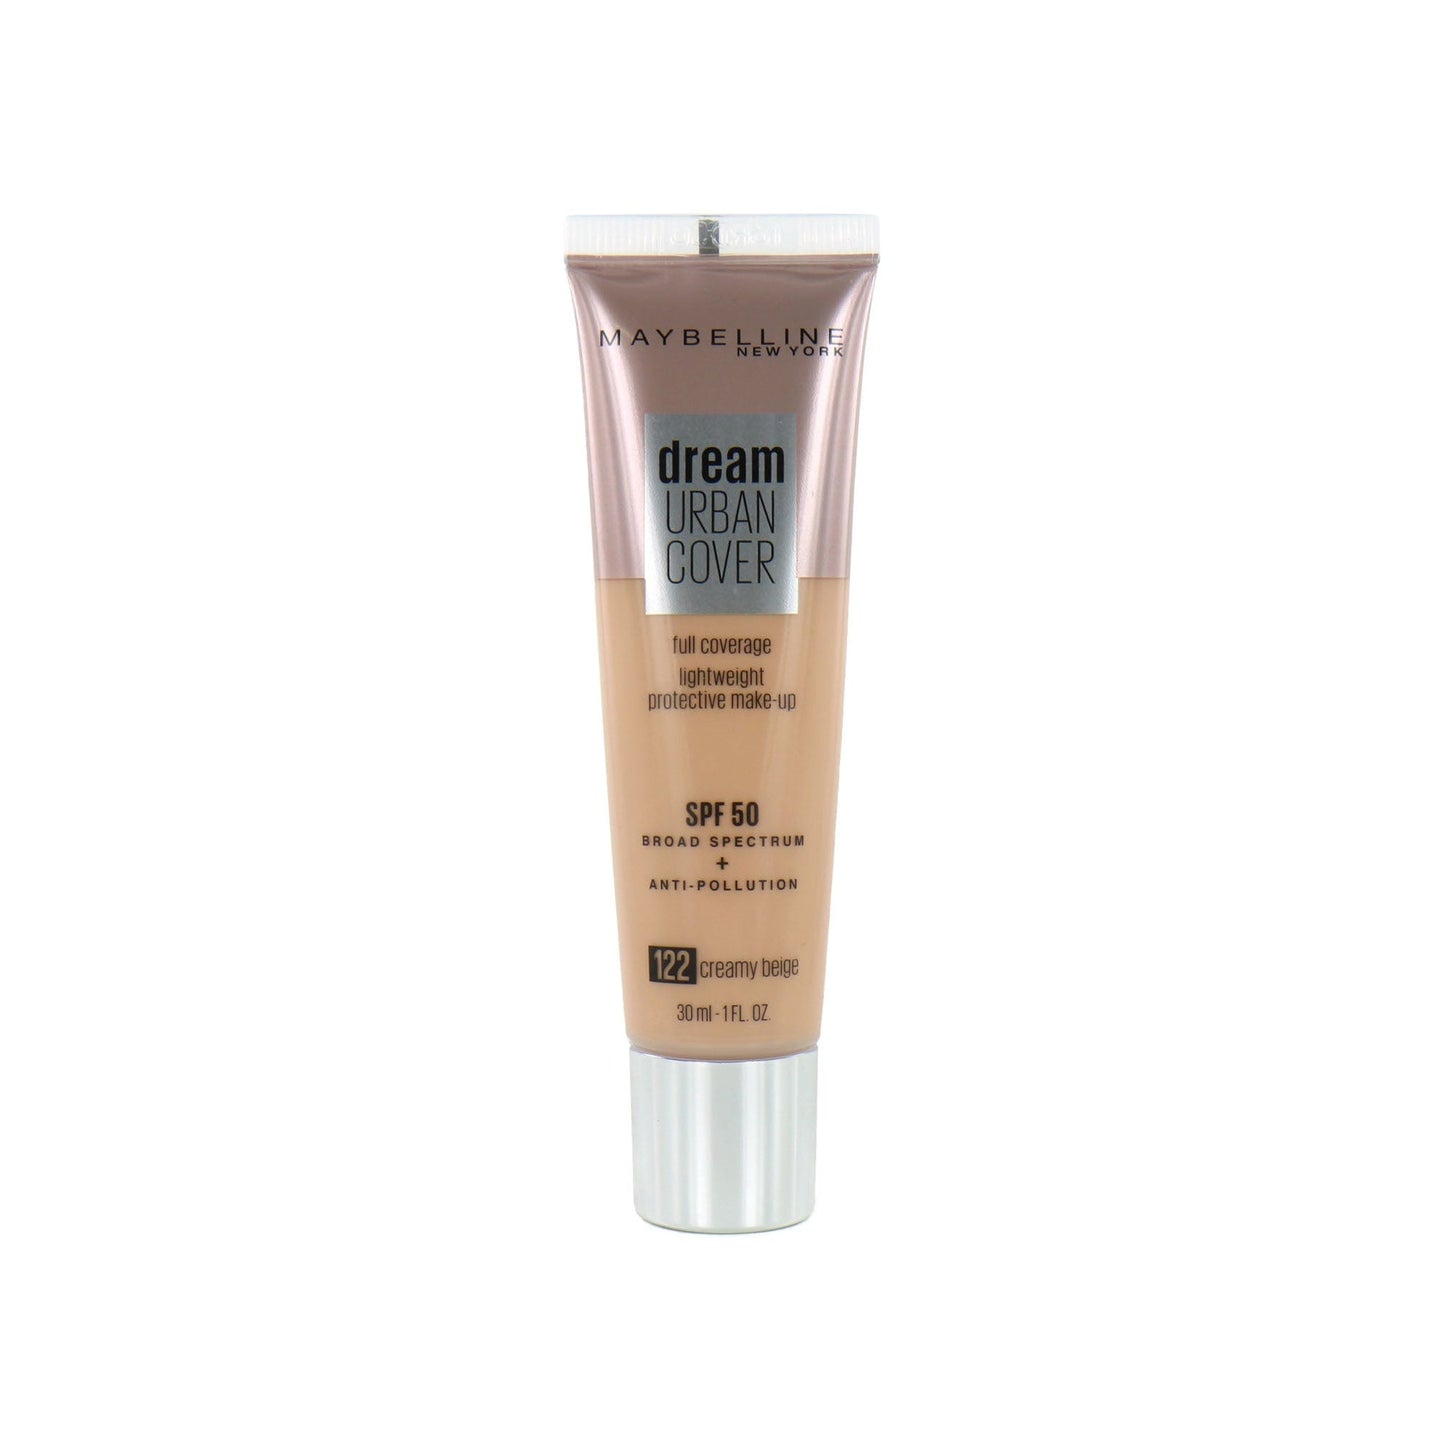 Maybeline Dream Urban Cover Foundation SPF50 - 122 Creamy Beige-Maybelline-BeautyNmakeup.co.uk